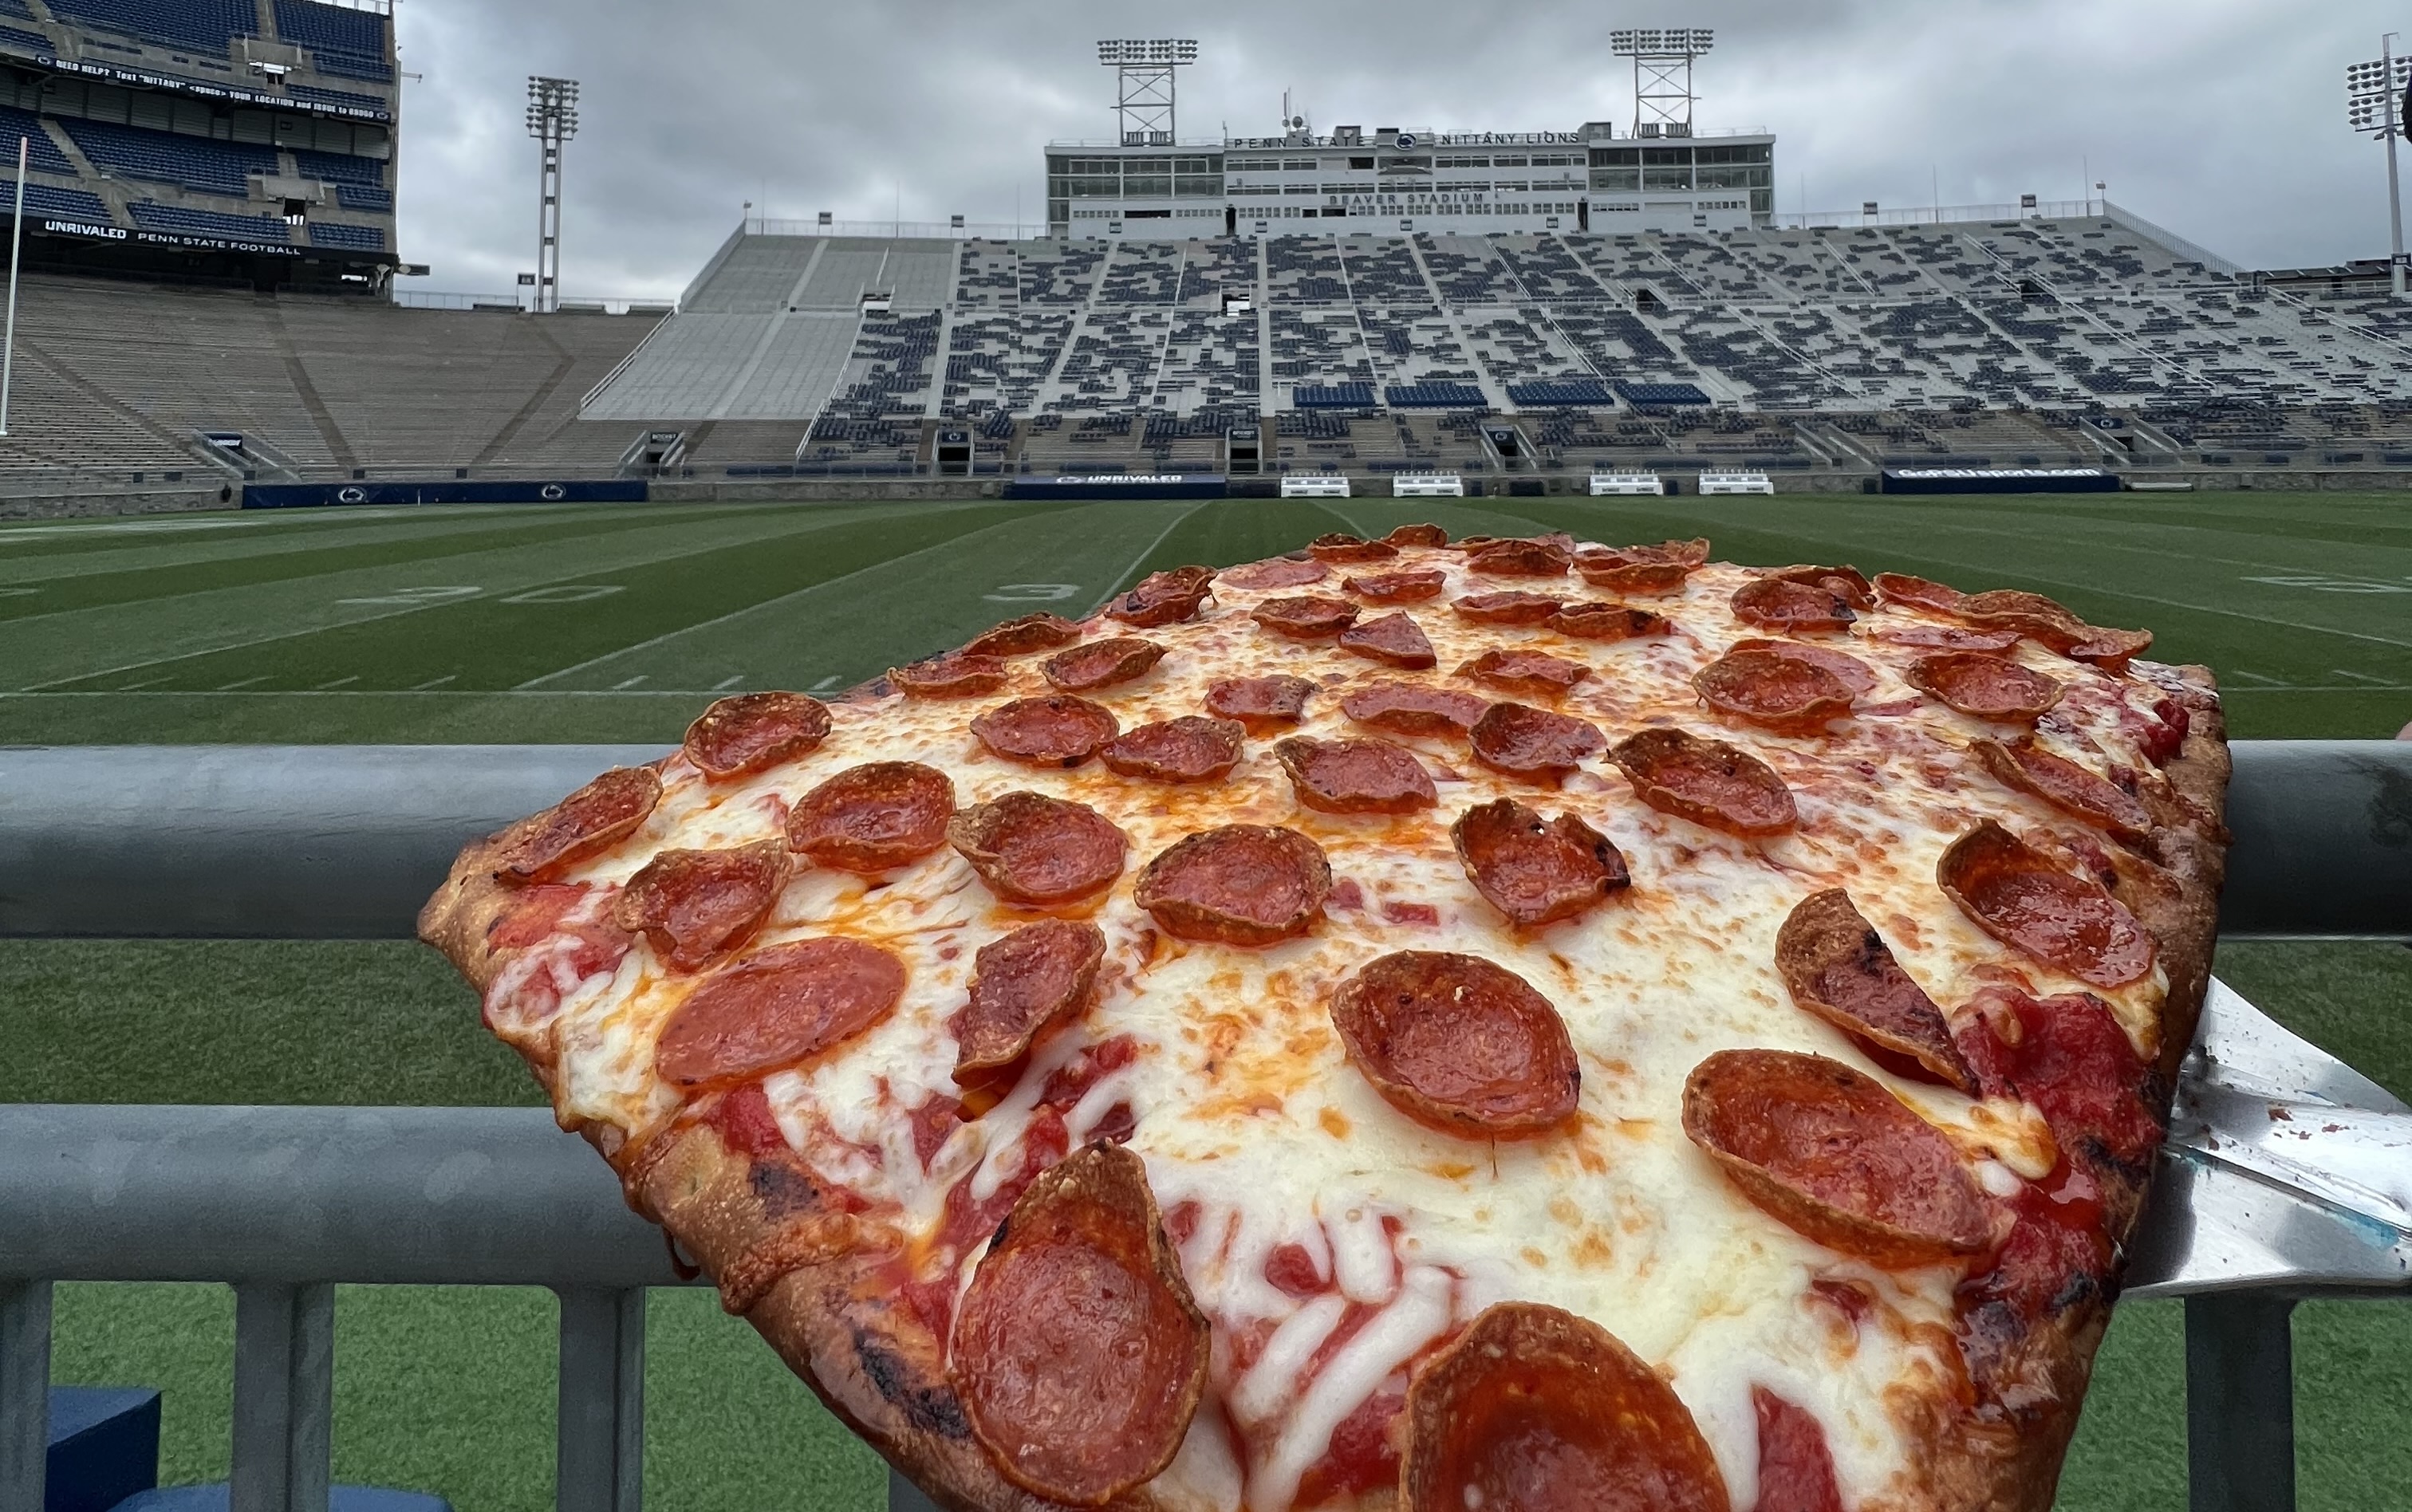 Penn State football fans will find more food choices, including Chickie's &  Pete's, Caliente Pizza 